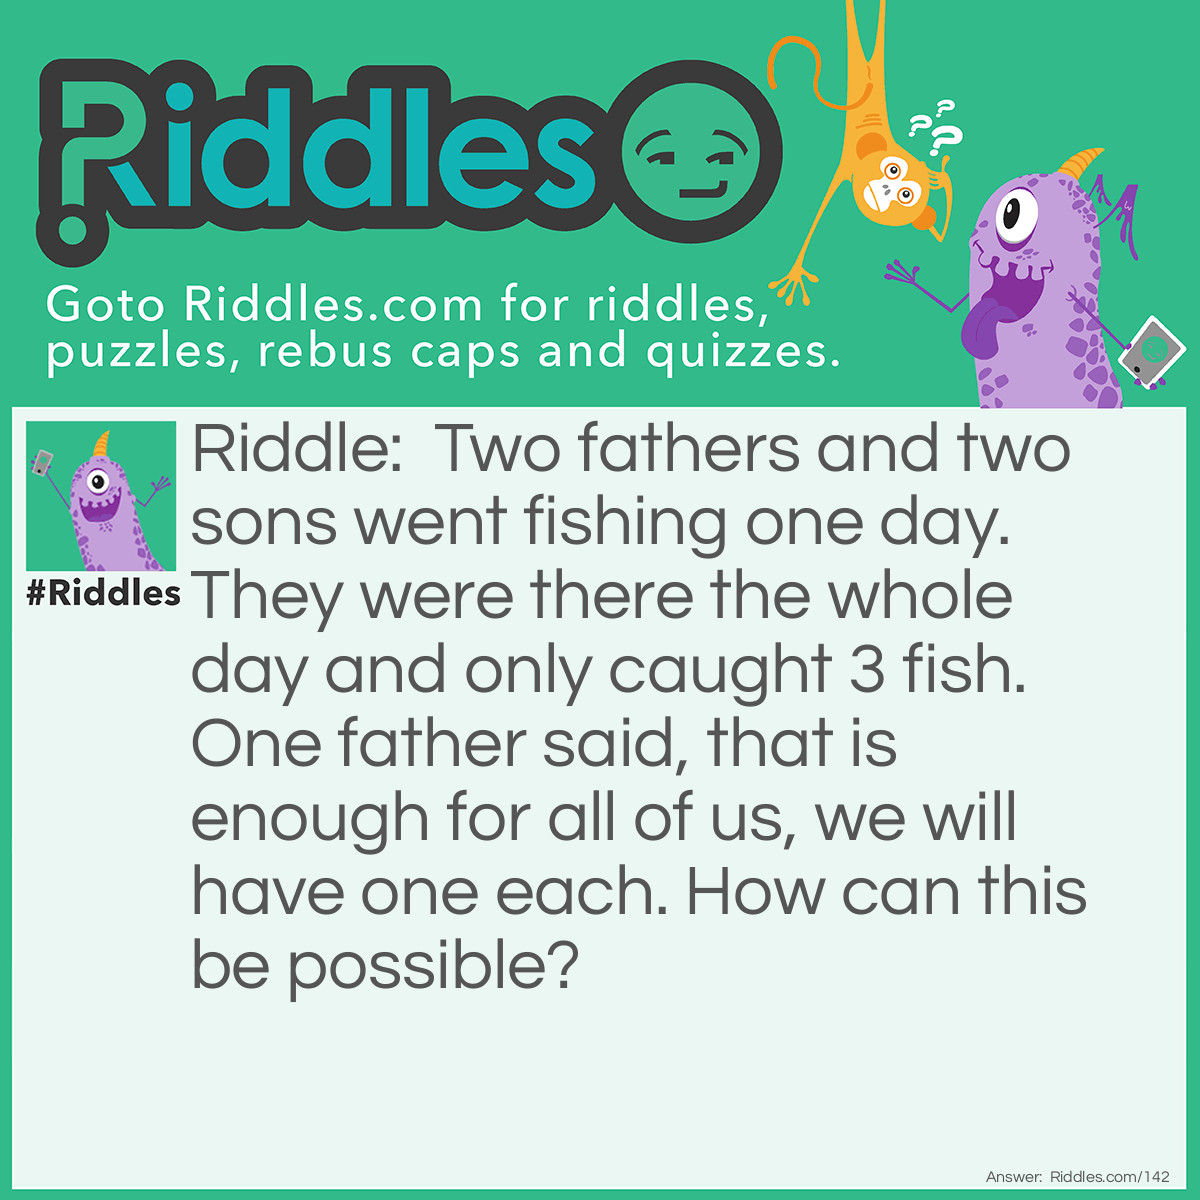 Riddle: Two fathers and two sons went fishing one day. They were there the whole day and only caught 3 fish. One father said, that is enough for all of us, we will have one each. How can this be possible? Answer: There was the father, his son, and his son's son. This equals 2 fathers and 2 sons for a total of 3!